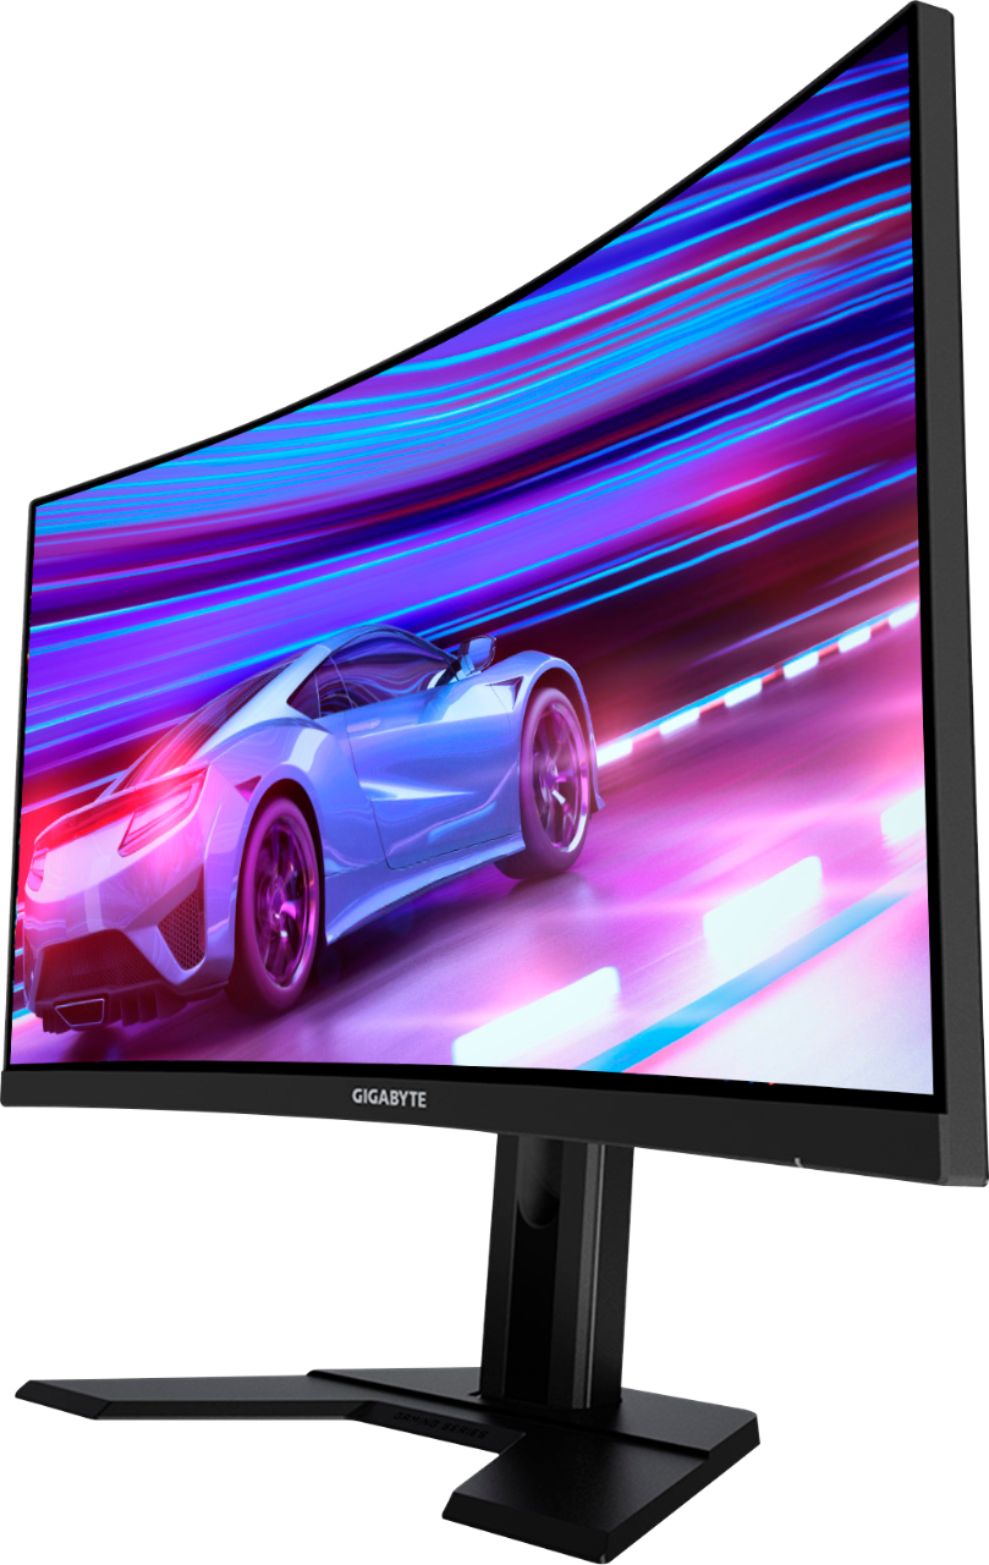 Angle View: GIGABYTE - 27" LED Curved QHD FreeSync Monitor with HDR (HDMI, DisplayPort, USB) - Black